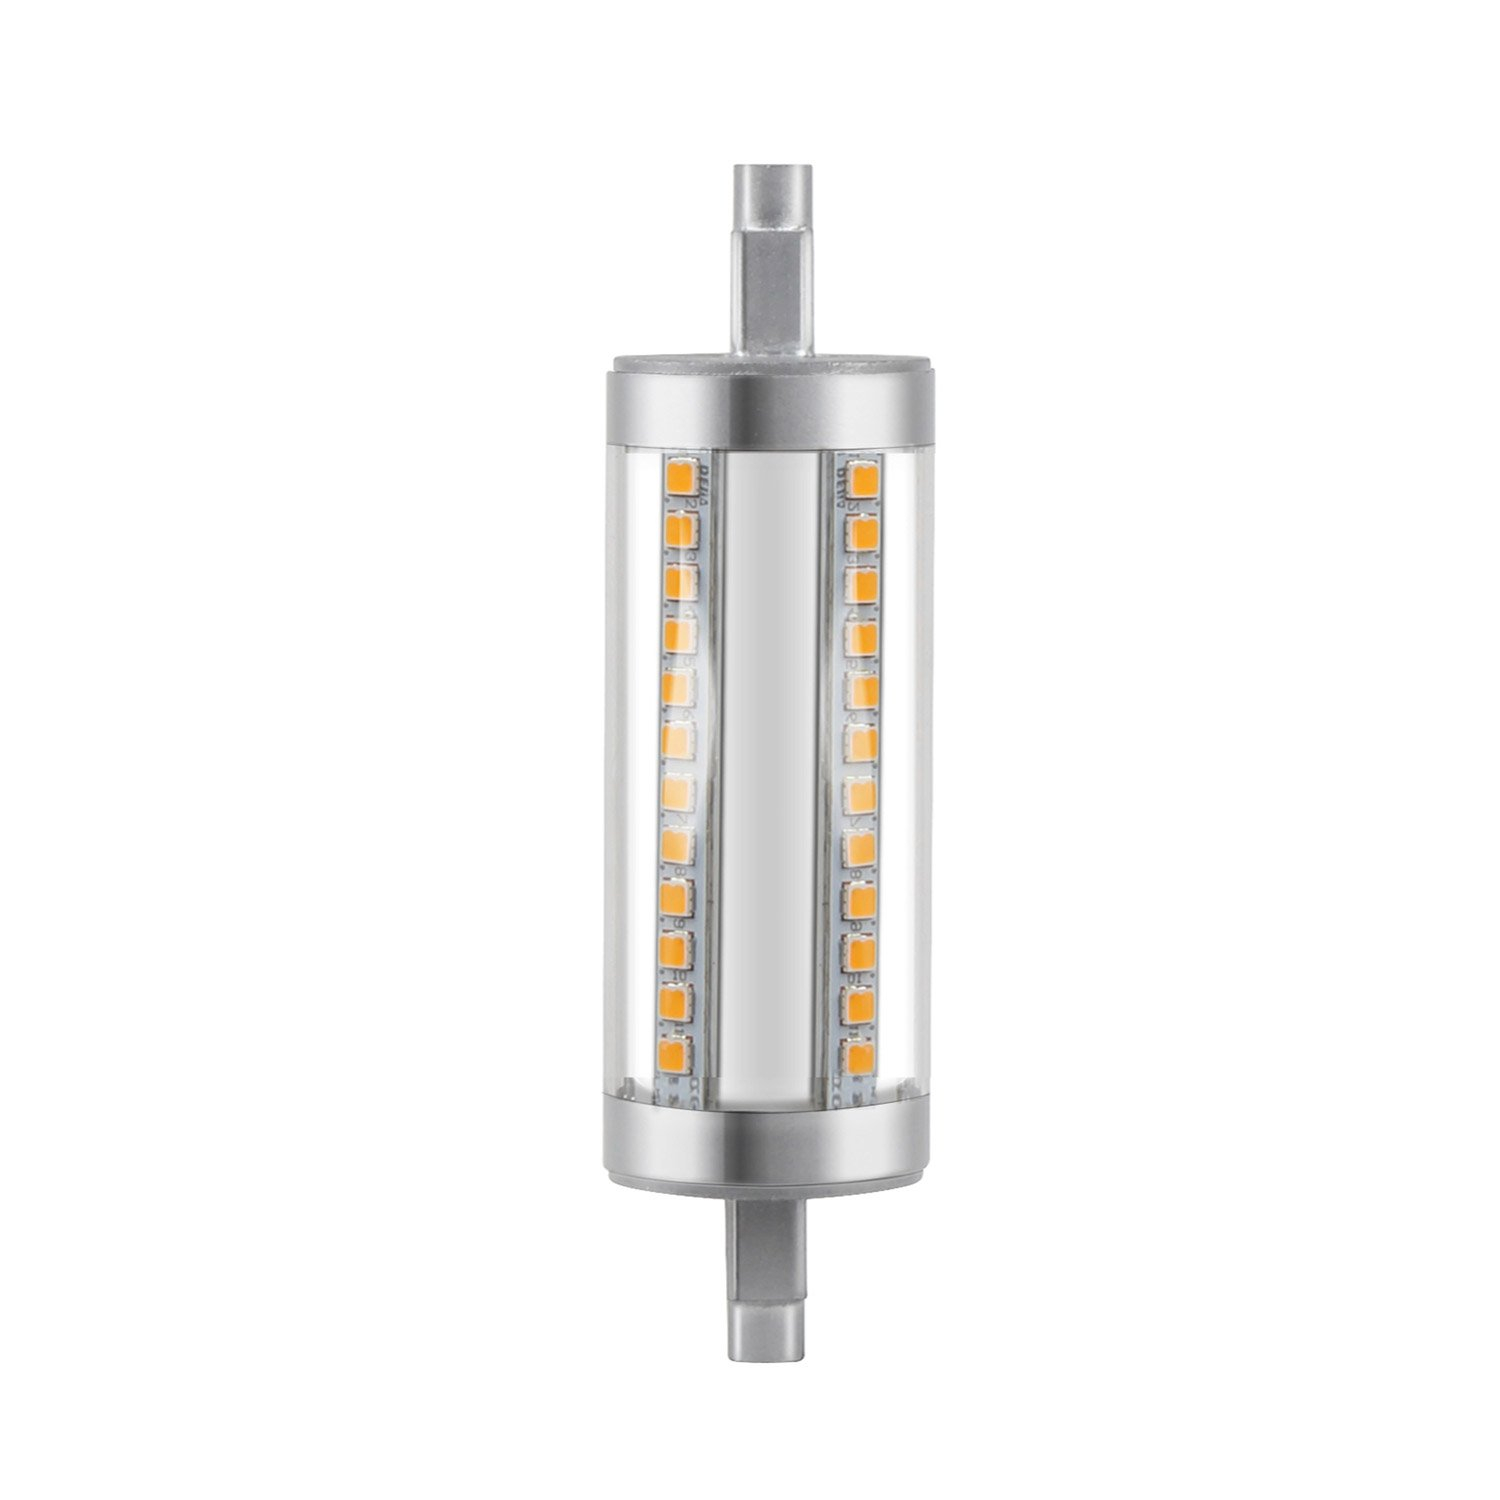 Pencil Led Bulb R7s 118mm 12w 1521lm 100w Equiv 4000k 300 Lexman Chez Leroy Merlin within proportions 1500 X 1500